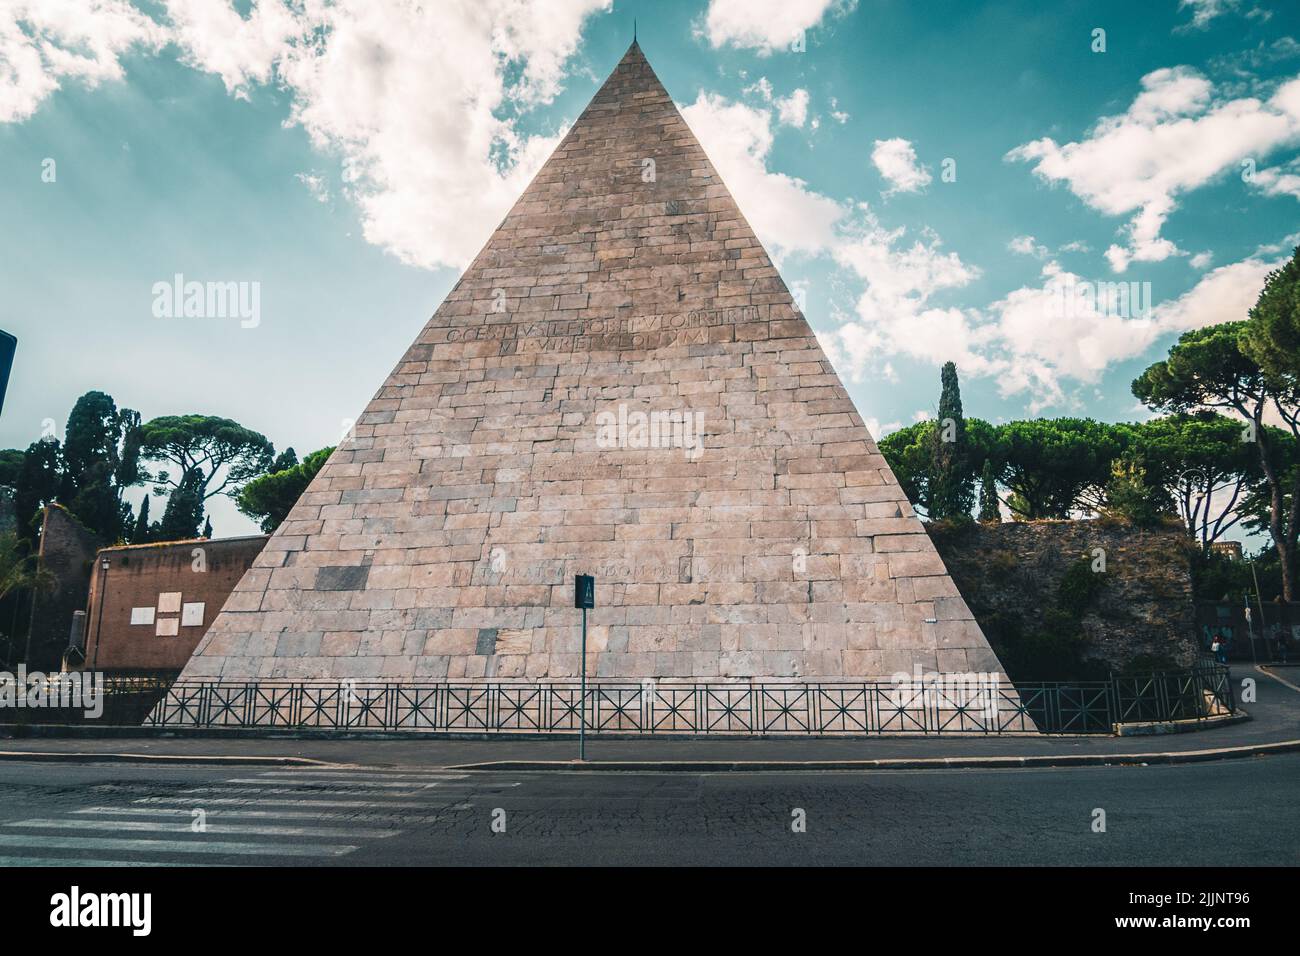 The Pyramid of Caius Cestius against a cloudy sky in Rome, Italy Stock Photo